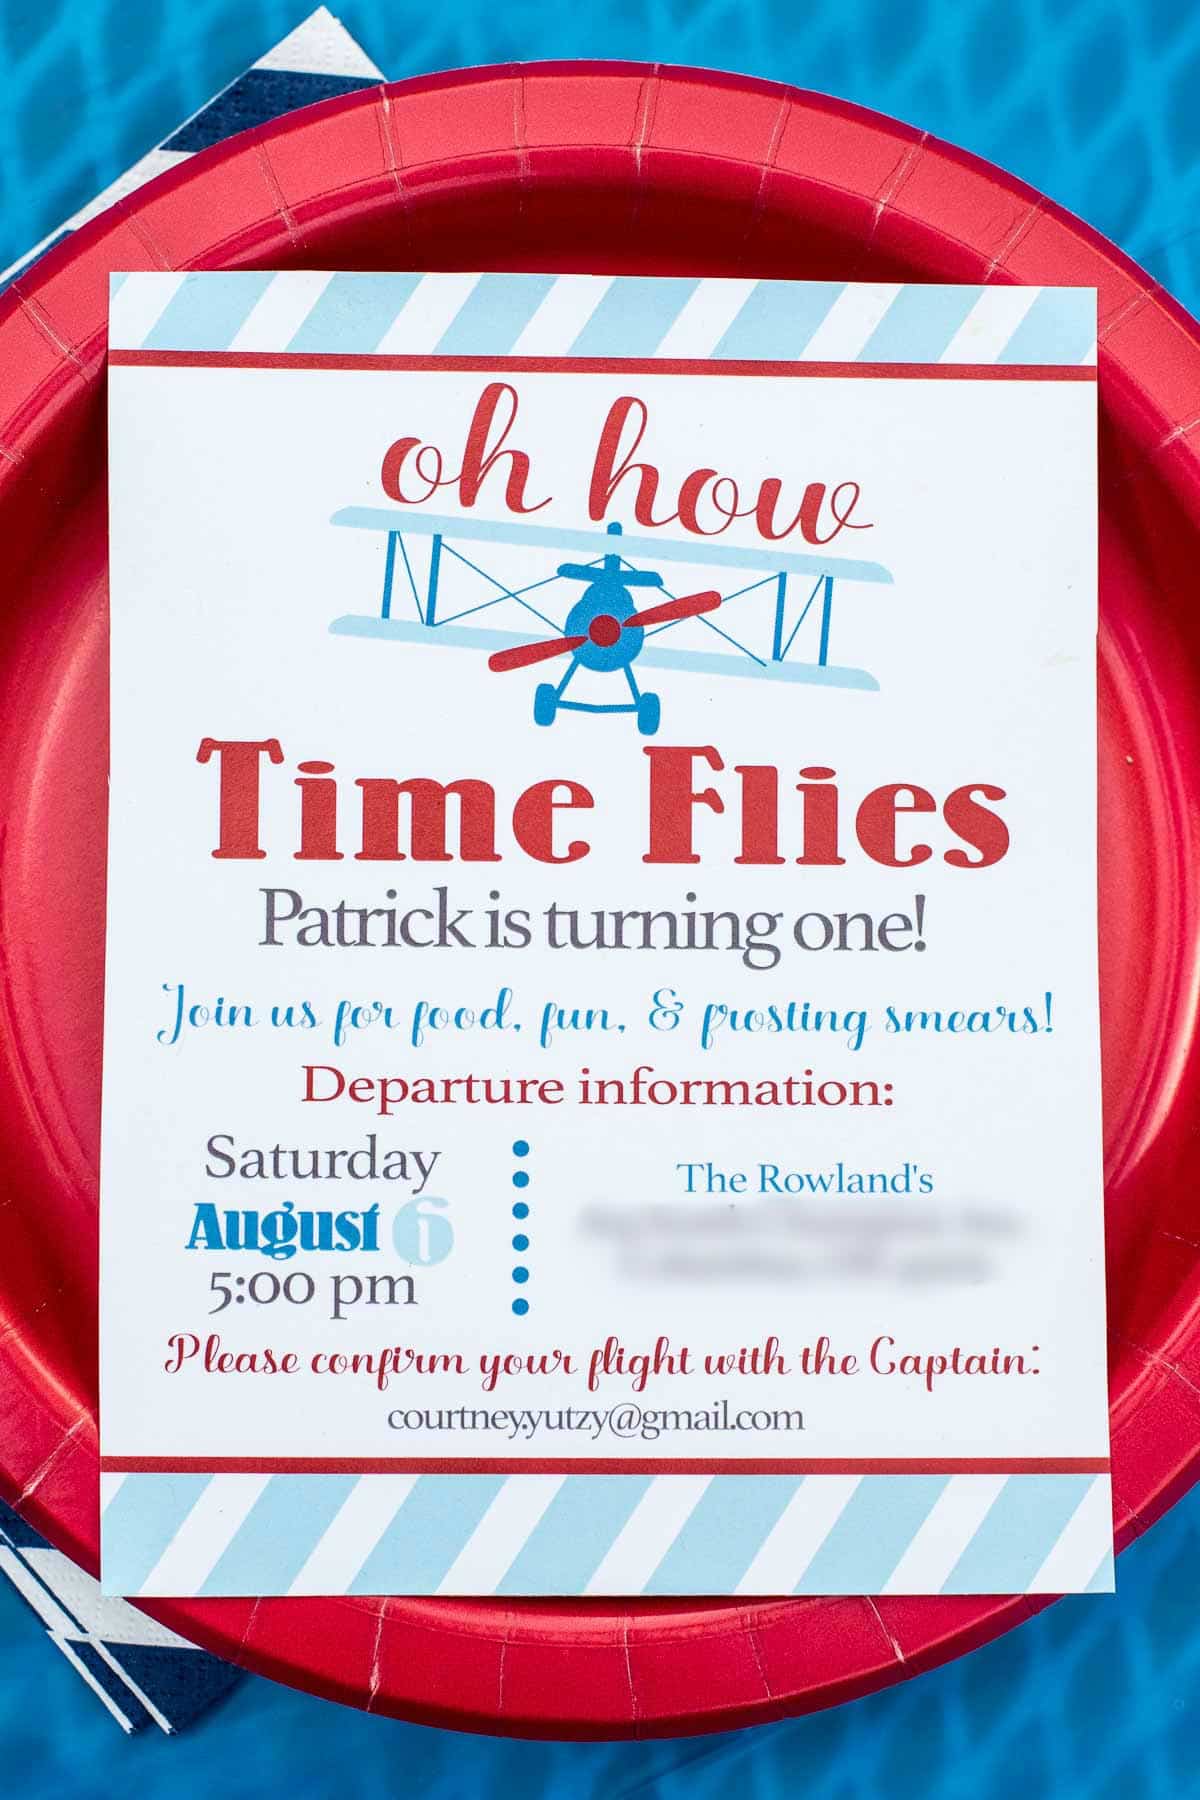 From invitations to decorations to food, this has everything you need for an adorable airplane themed birthday party!